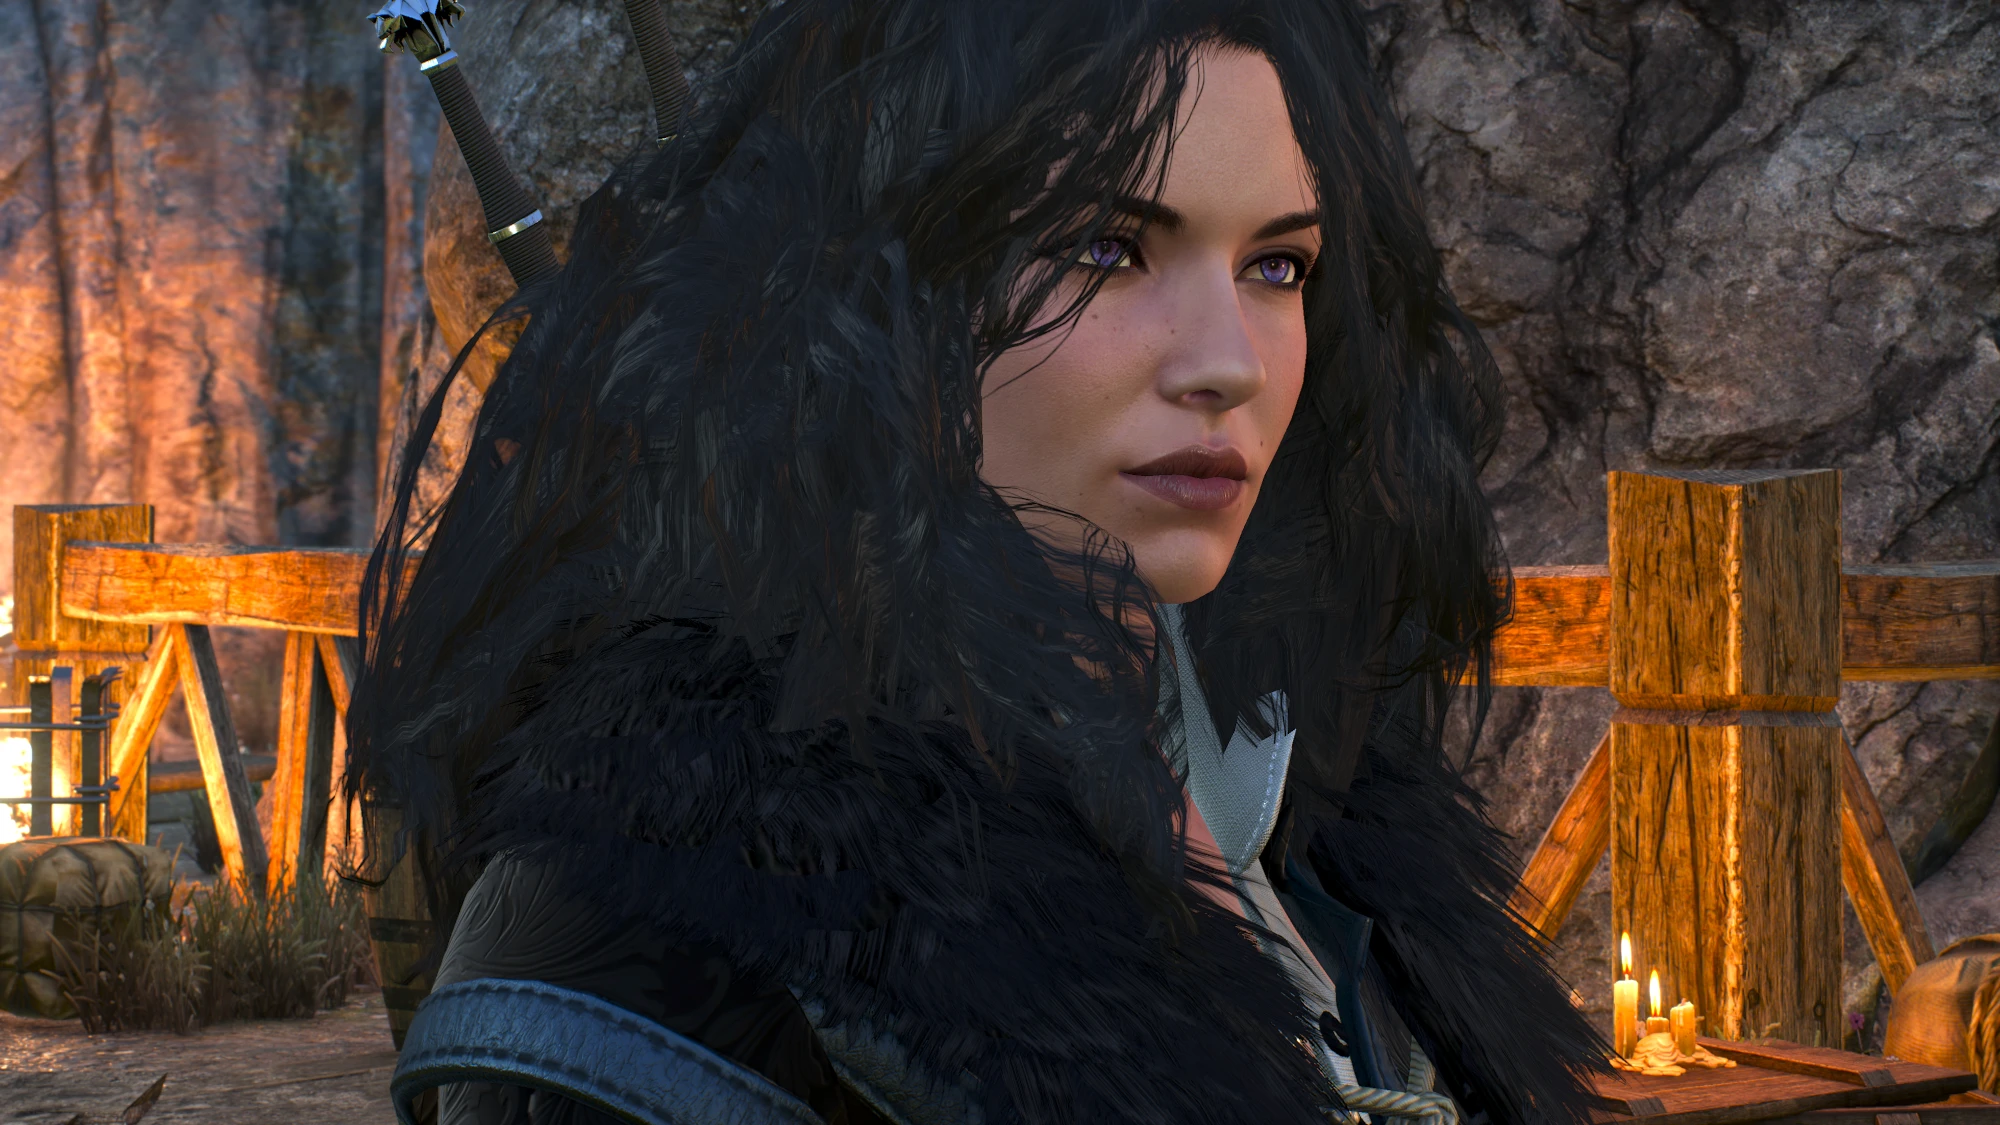 Yennefer of vengerberg the witcher 3 voiced standalone follower фото 16